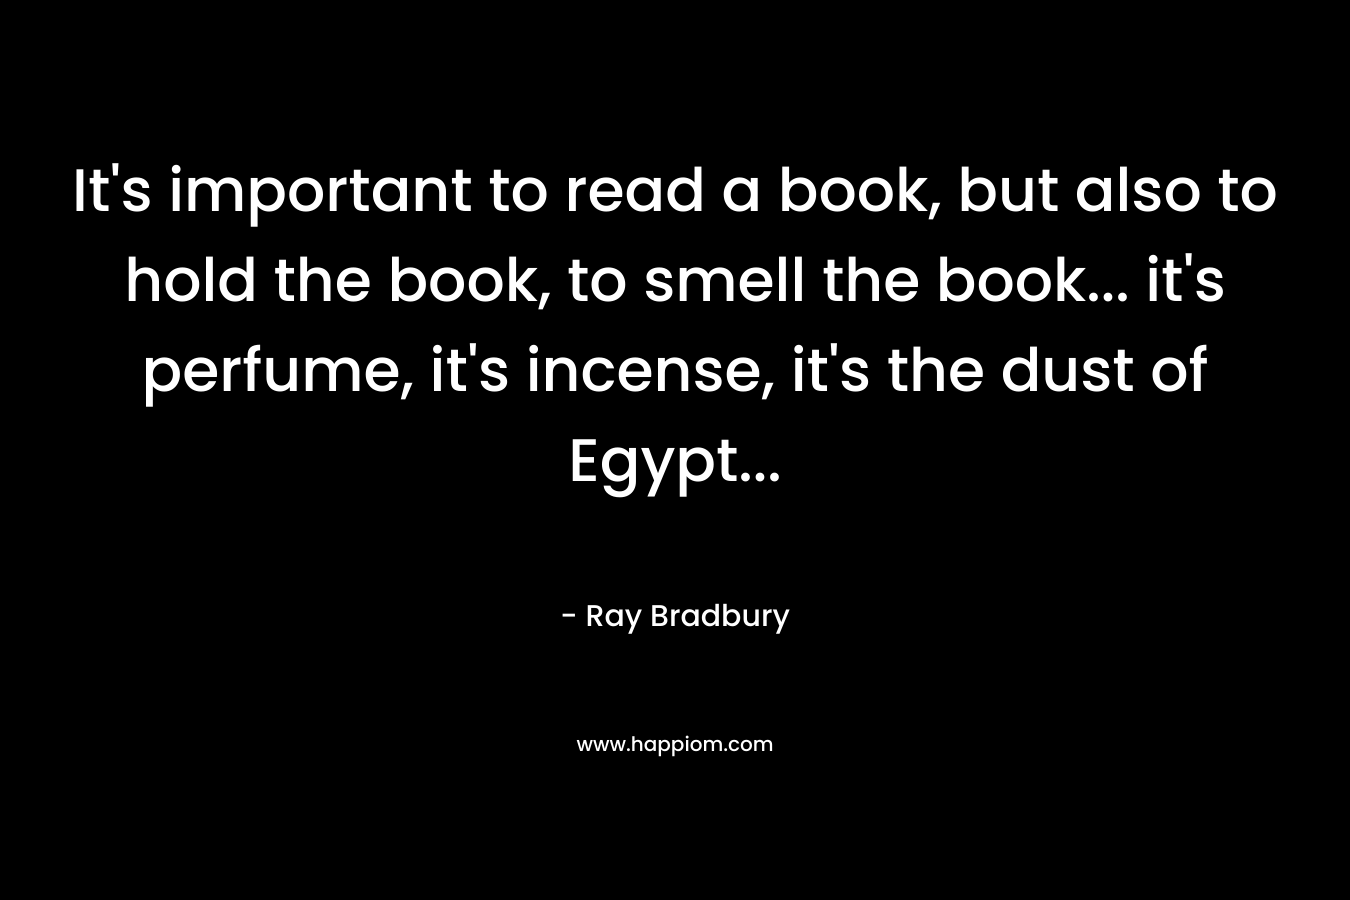 It’s important to read a book, but also to hold the book, to smell the book… it’s perfume, it’s incense, it’s the dust of Egypt… – Ray Bradbury